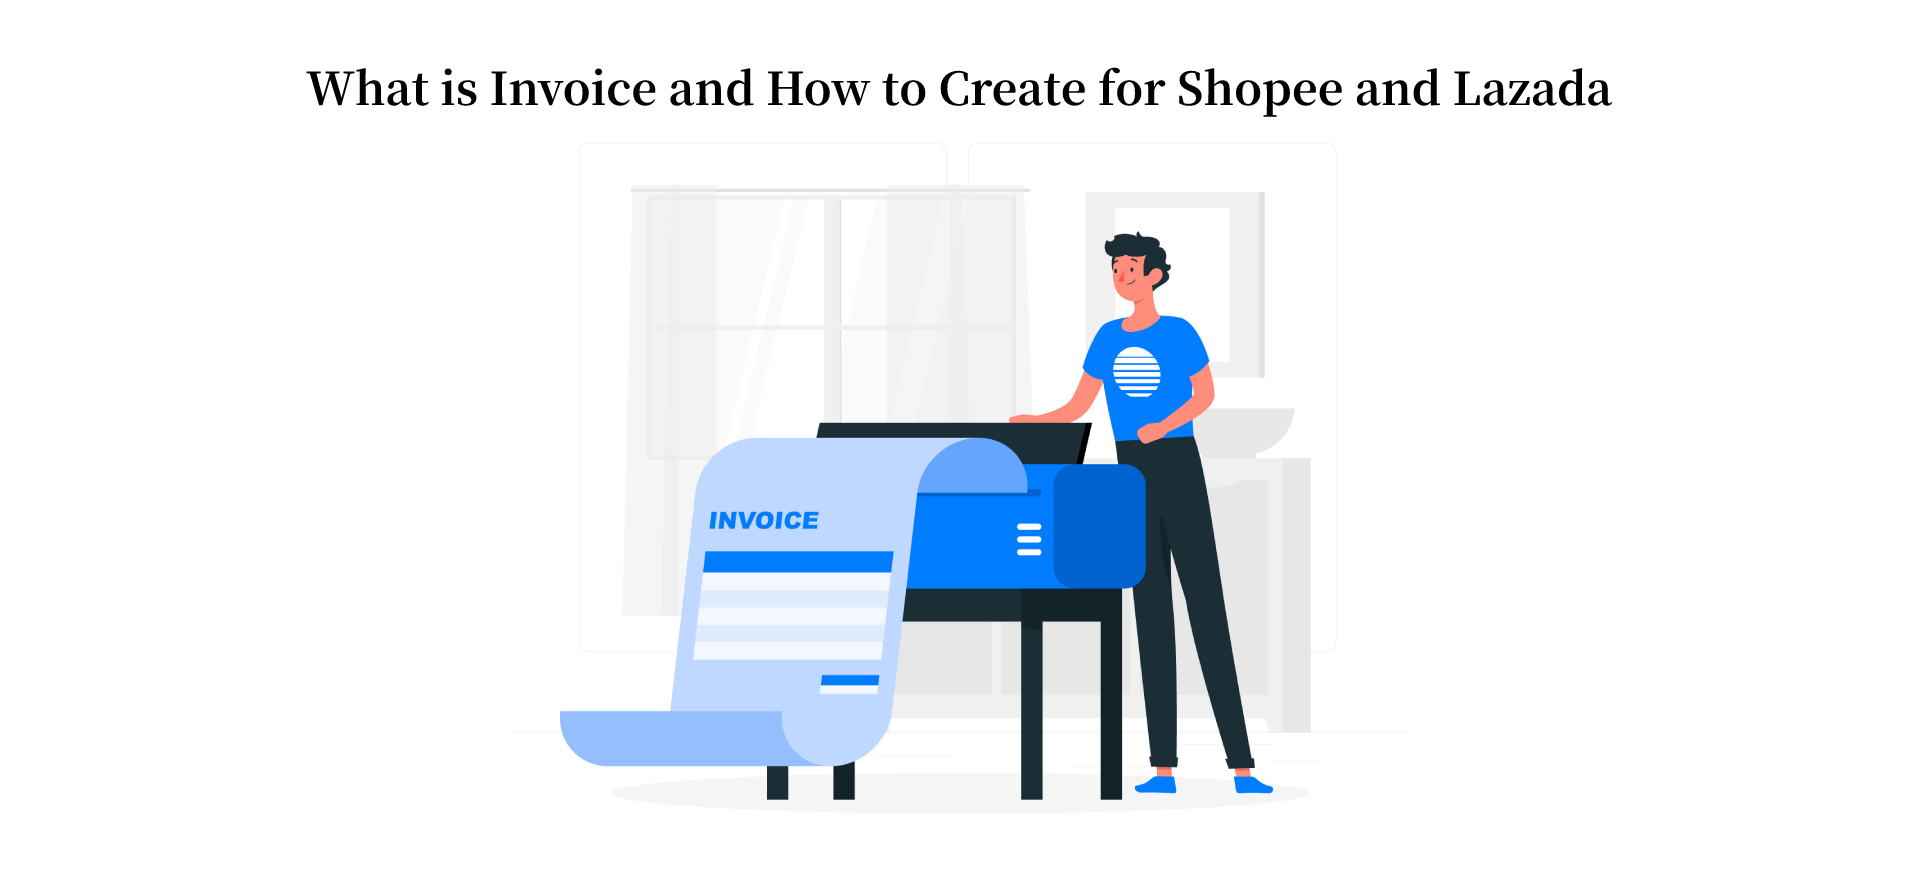 What is Invoice and How to Create for Shopee and Lazada